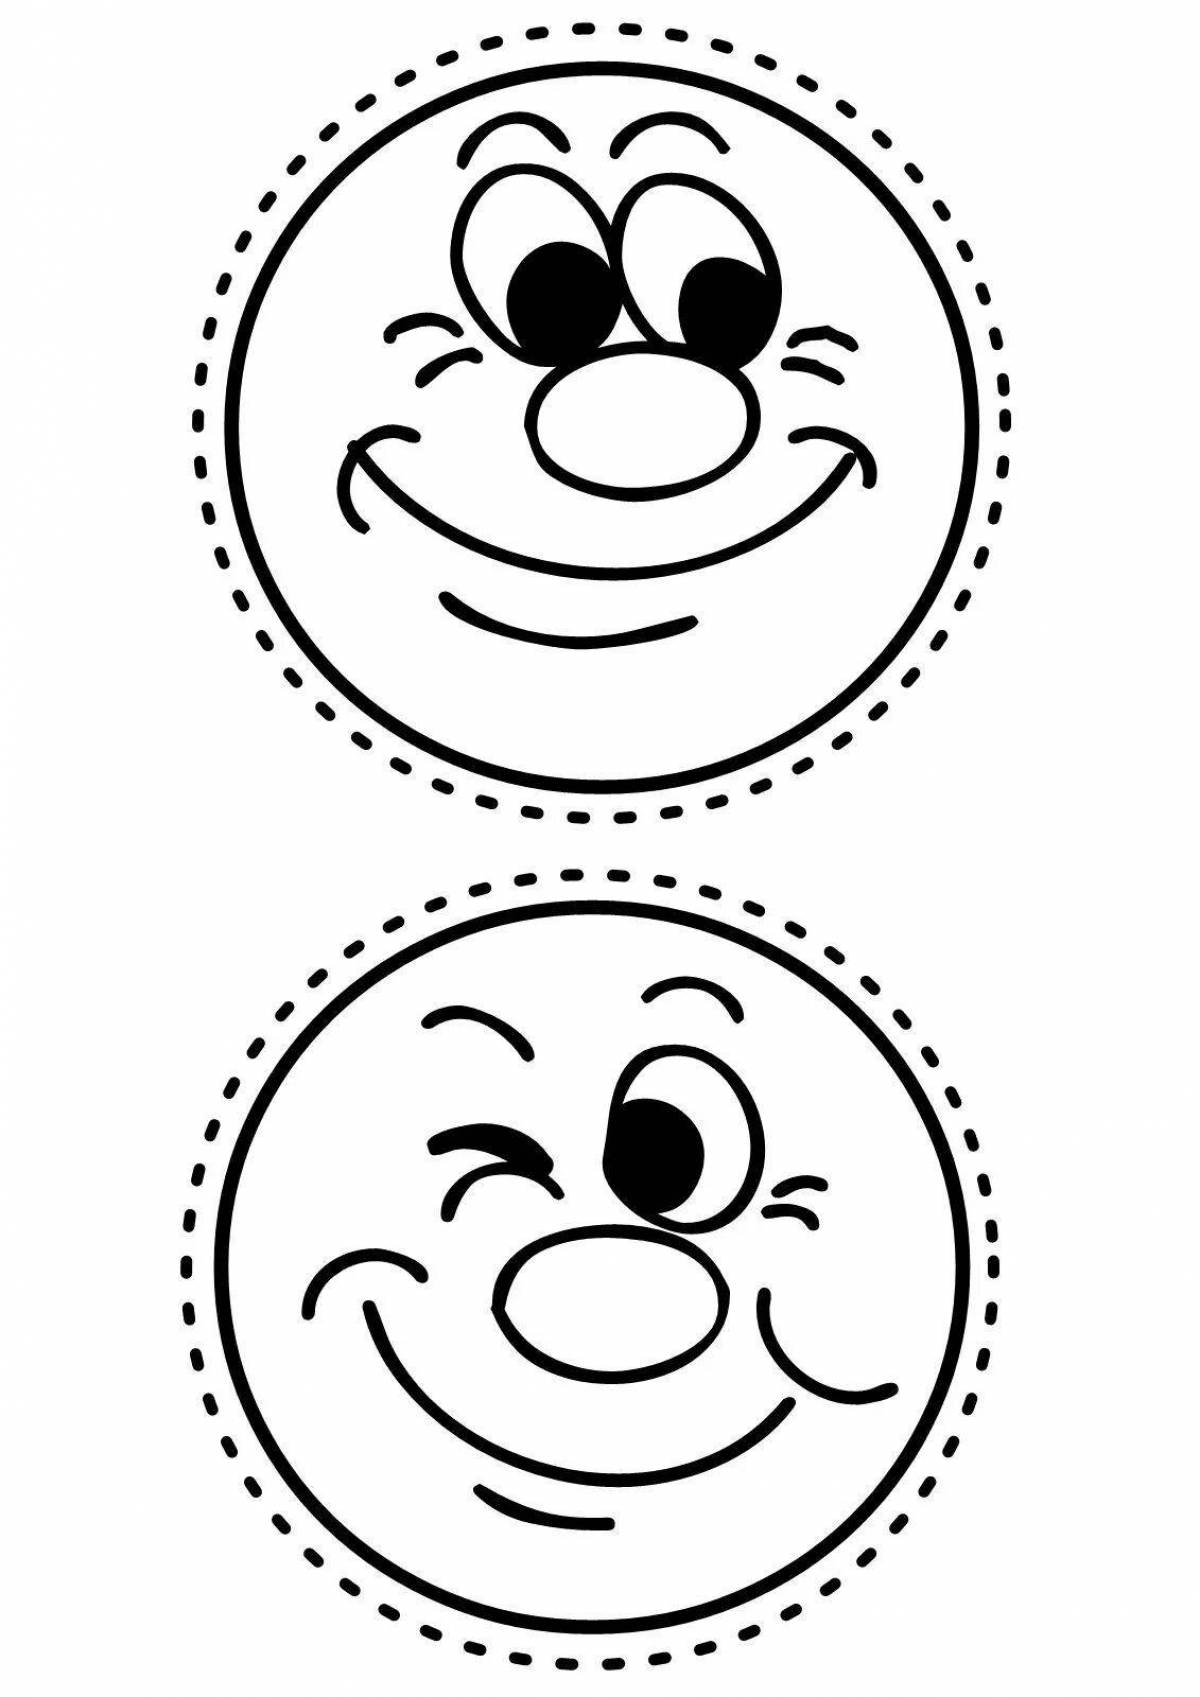 Coloring funny smiley face for kids